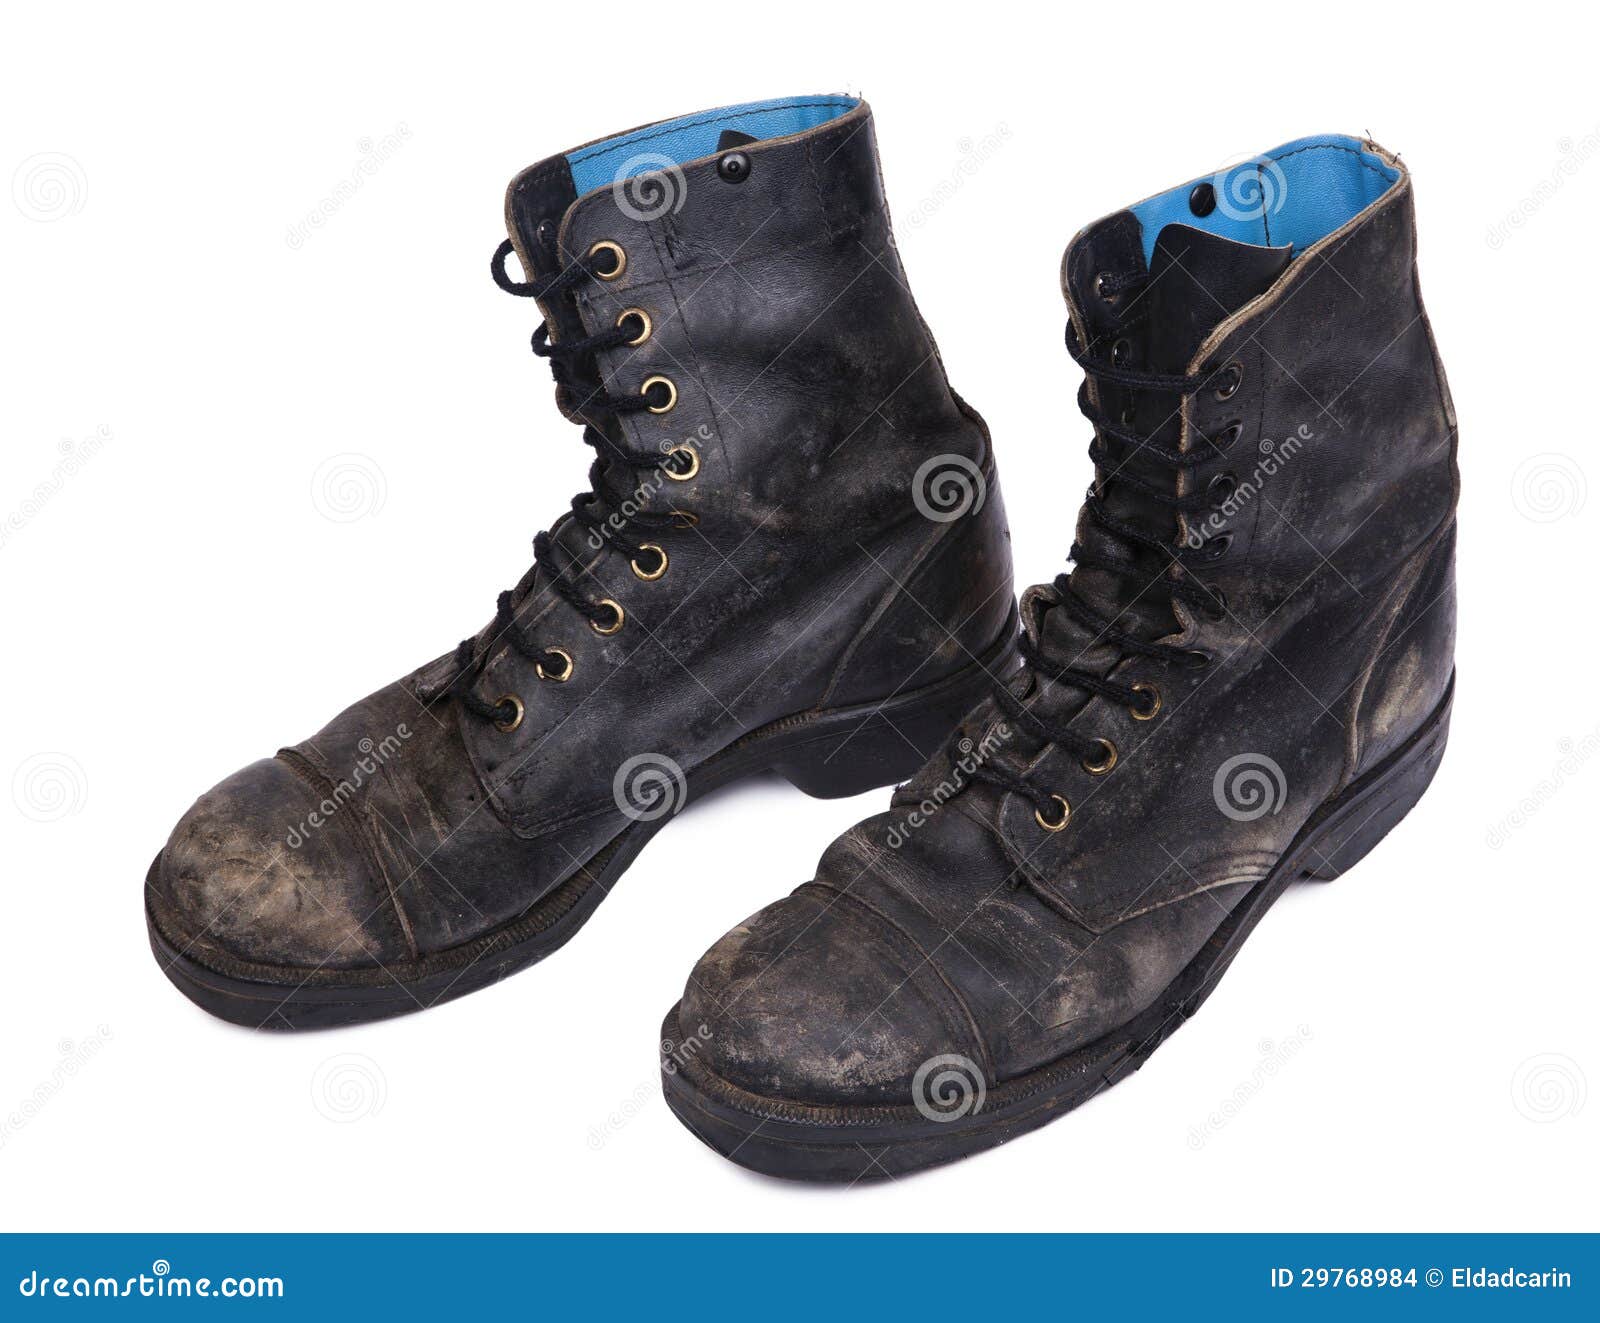 Isolated Used Army Boots - High Angle Diagonal Stock Photo - Image of ...